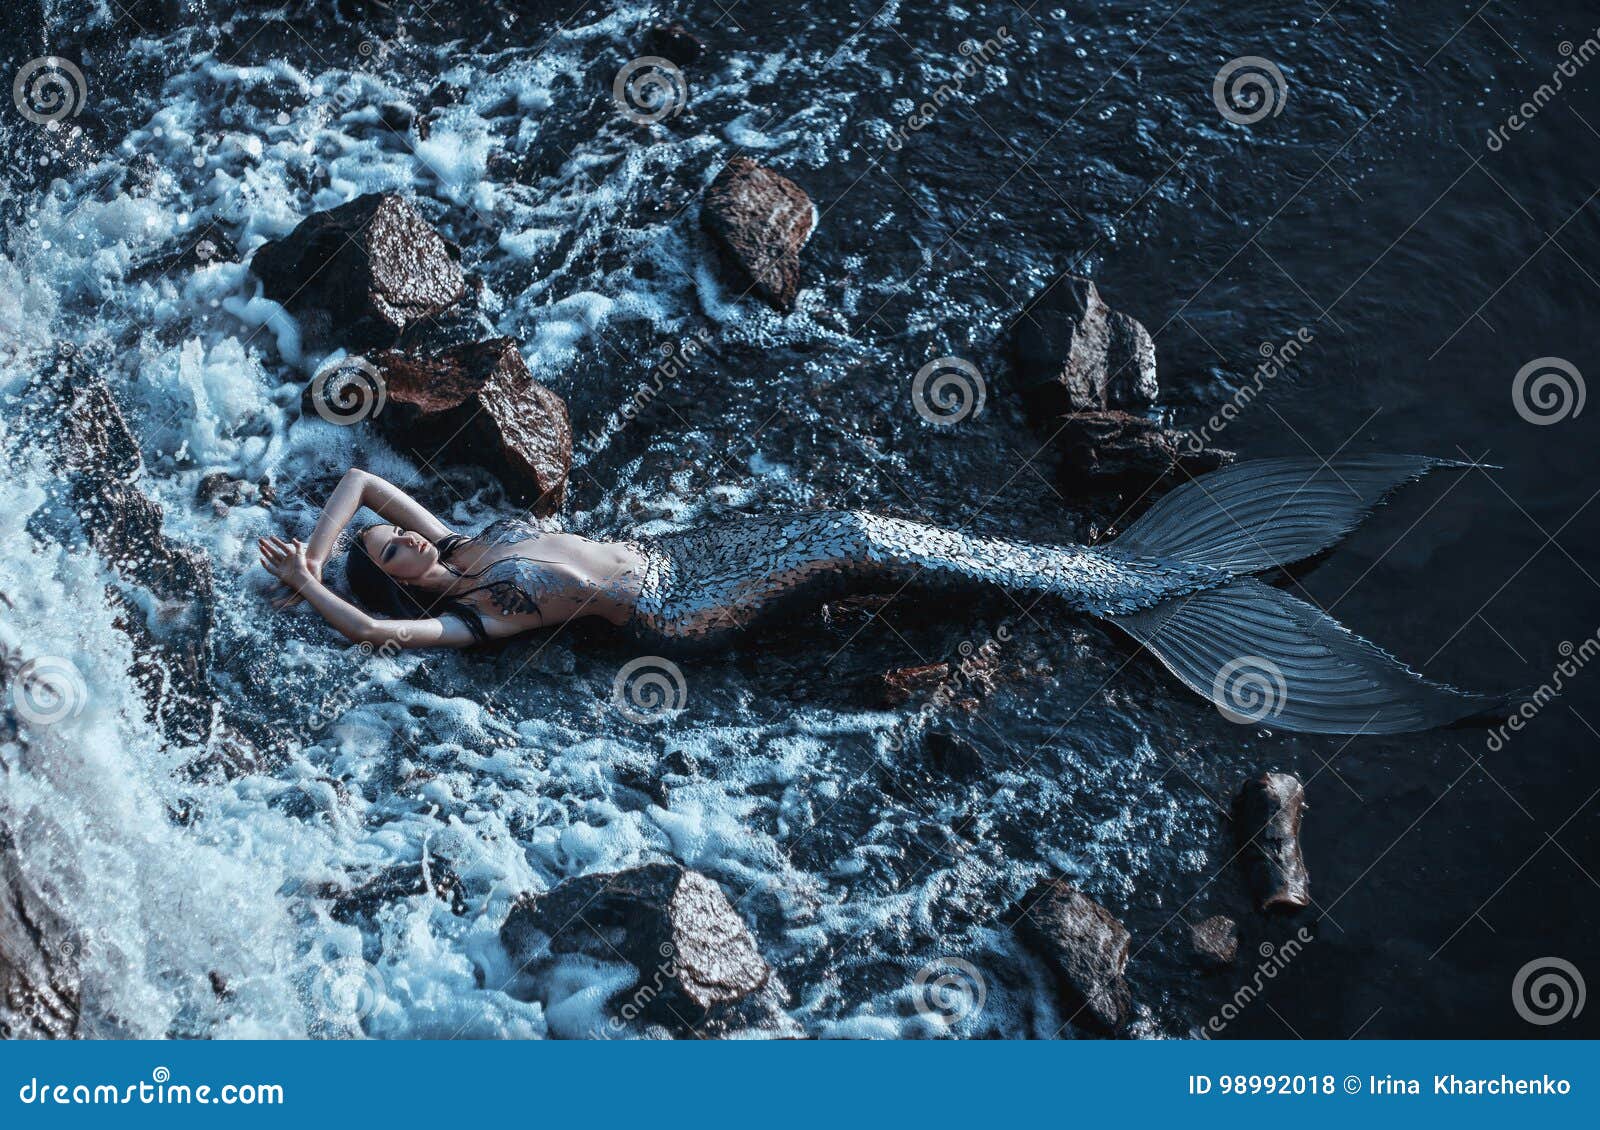 The real mermaid stock photo. Image of legend, fish, female - 98992018